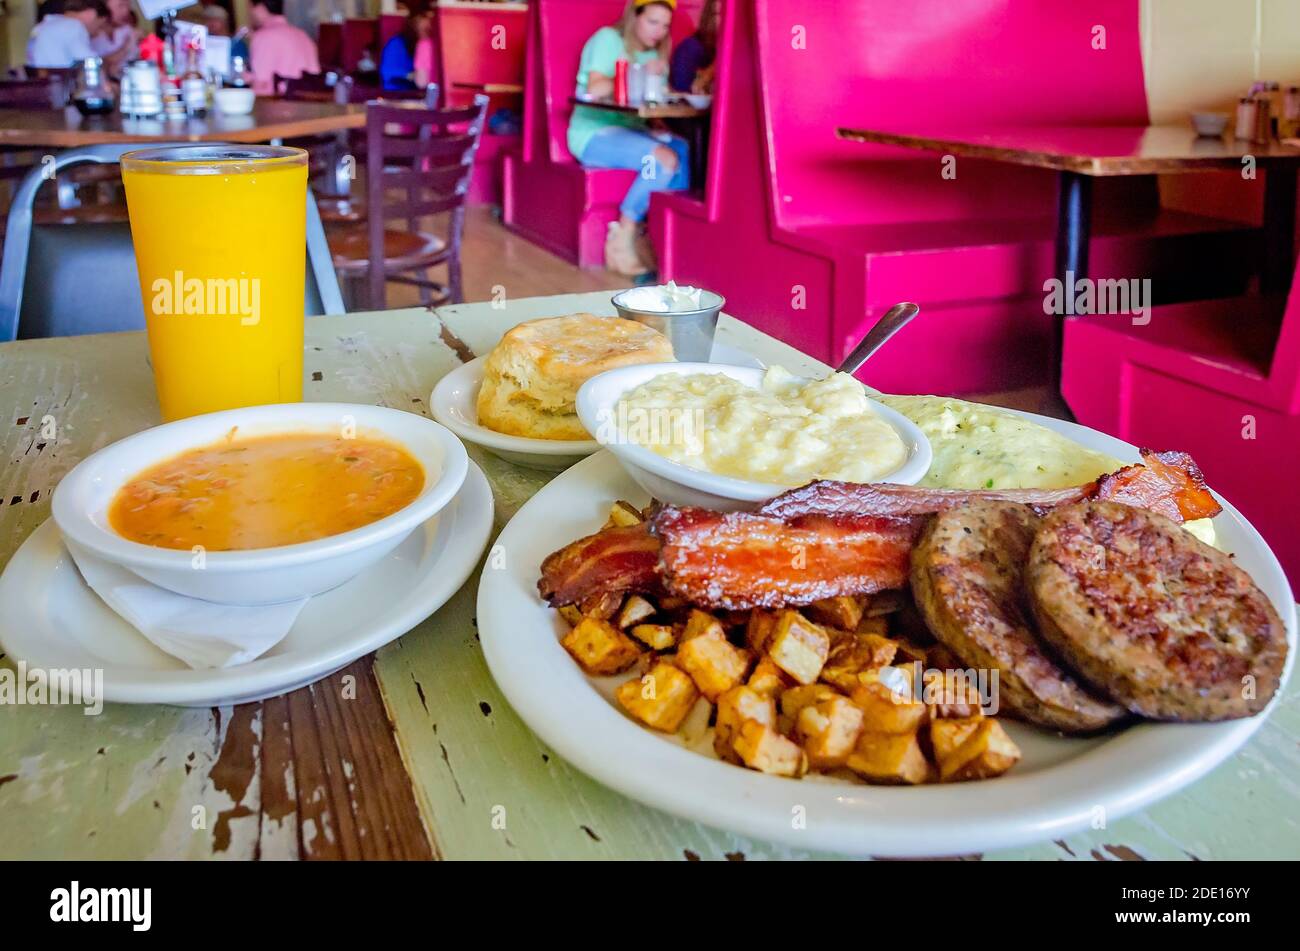 A Southern-style breakfast is served at Big Bad Breakfast, May 31, 2015, in Oxford, Mississippi. The restaurant was founded in 2008. Stock Photo